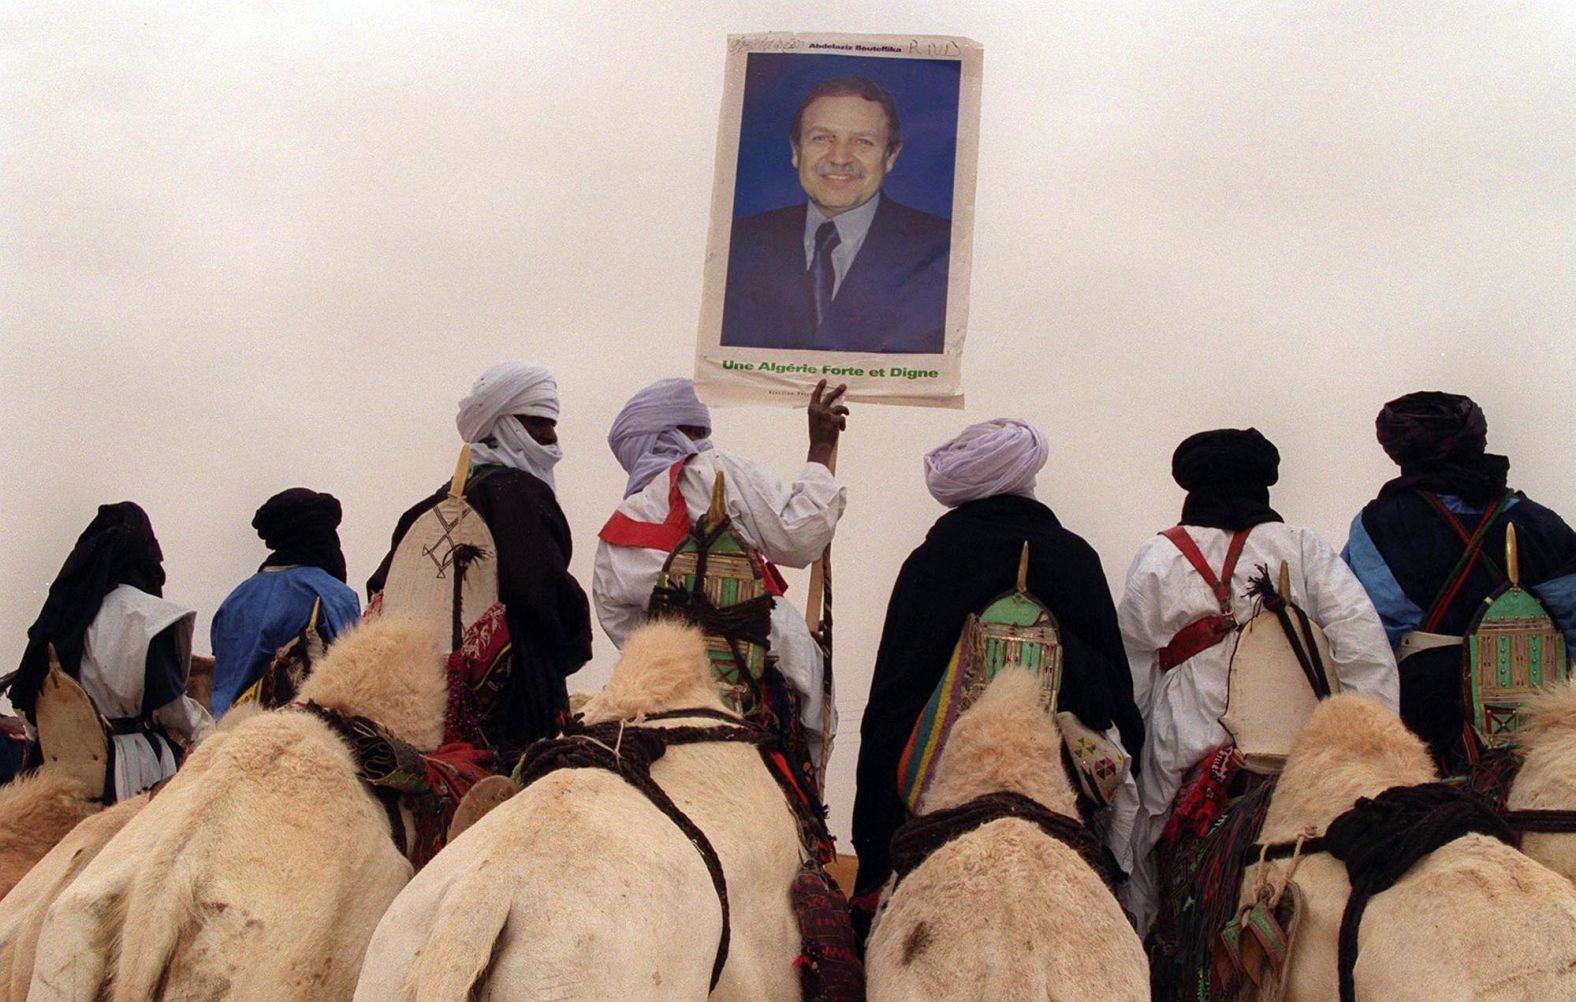 Bouteflika supporters ride camels and hold up a poster of the presidential candidate in April 1999.